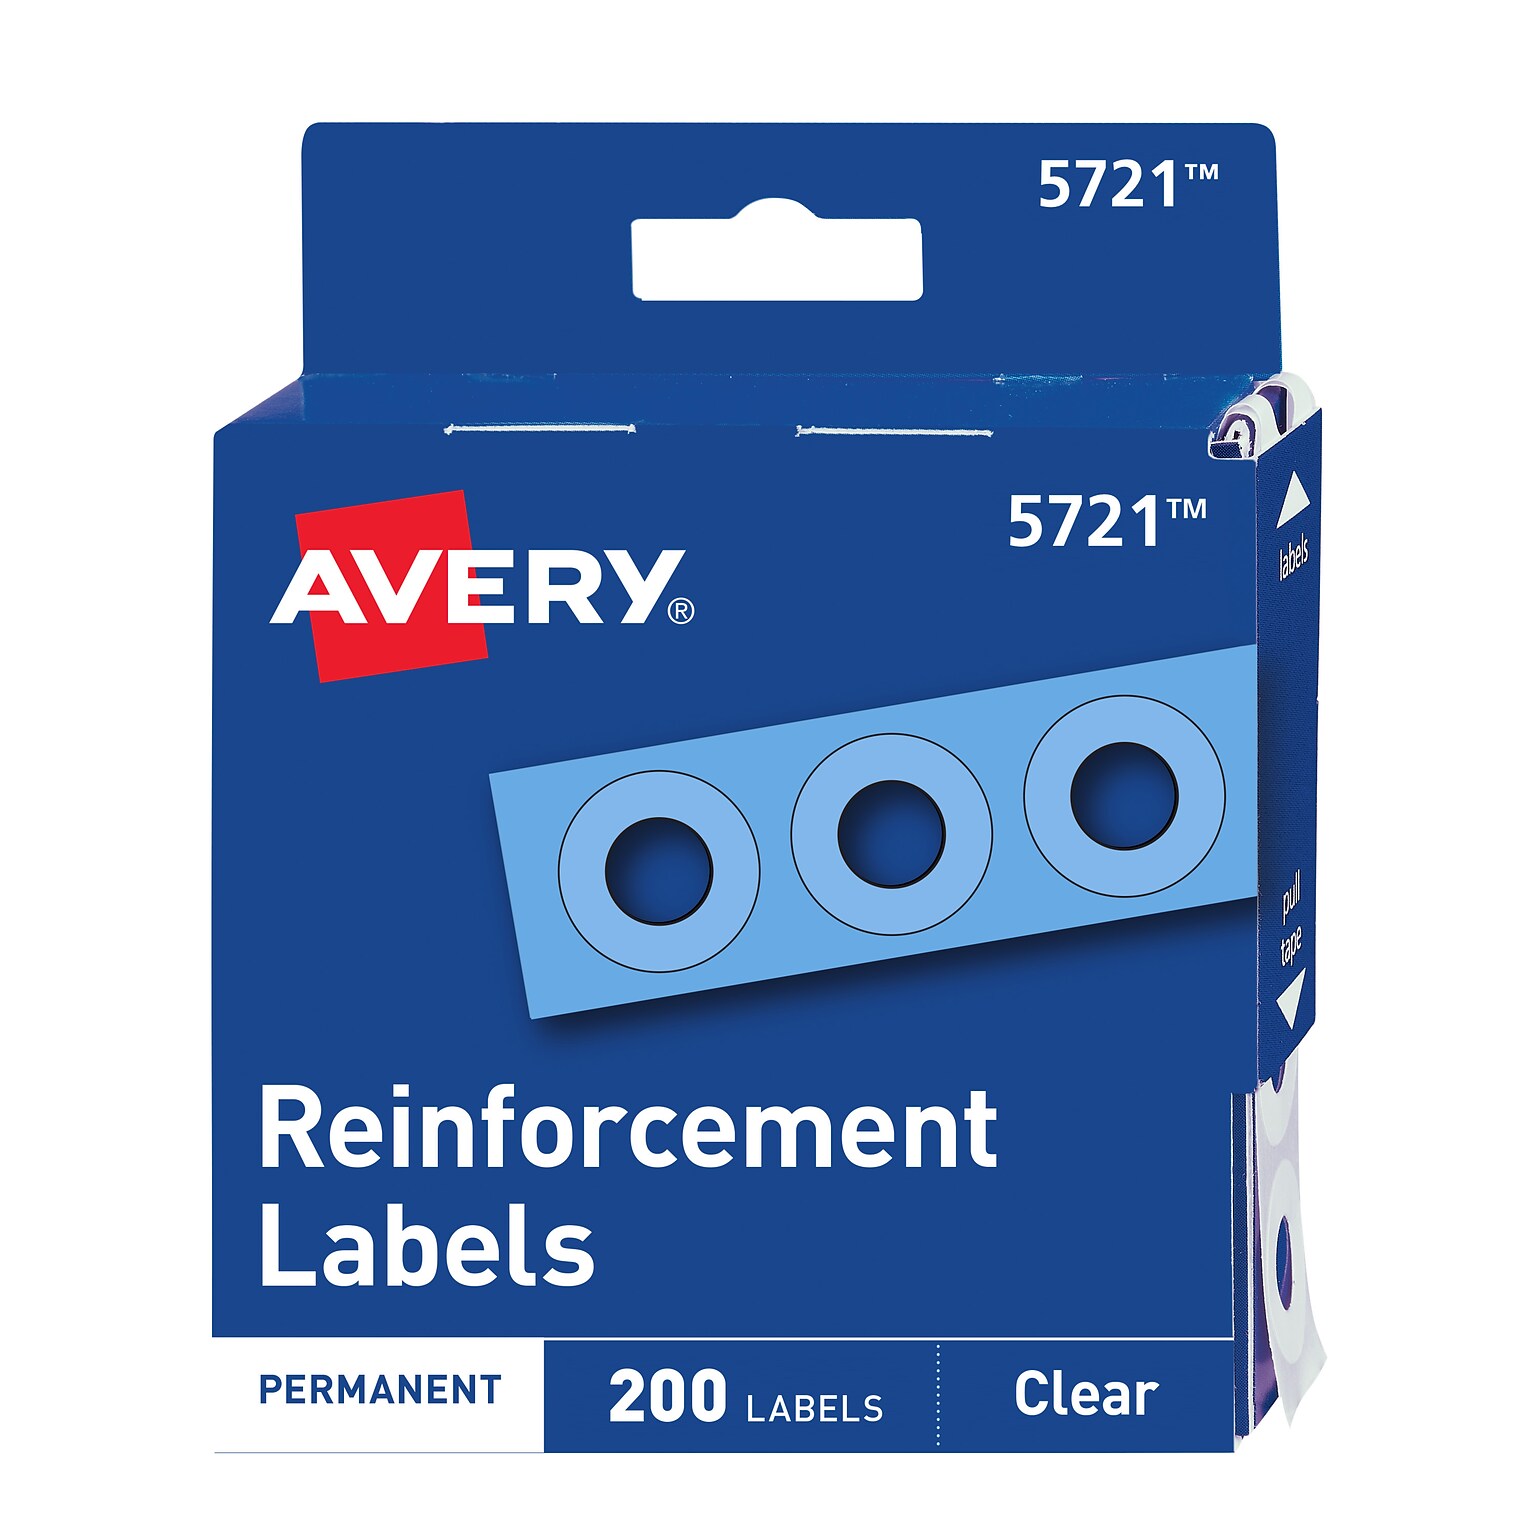 Avery Self-Adhesive Plastic Reinforcement Labels in Dispenser, 1/4 Diameter, Glossy Clear, 200/Pack (5721)